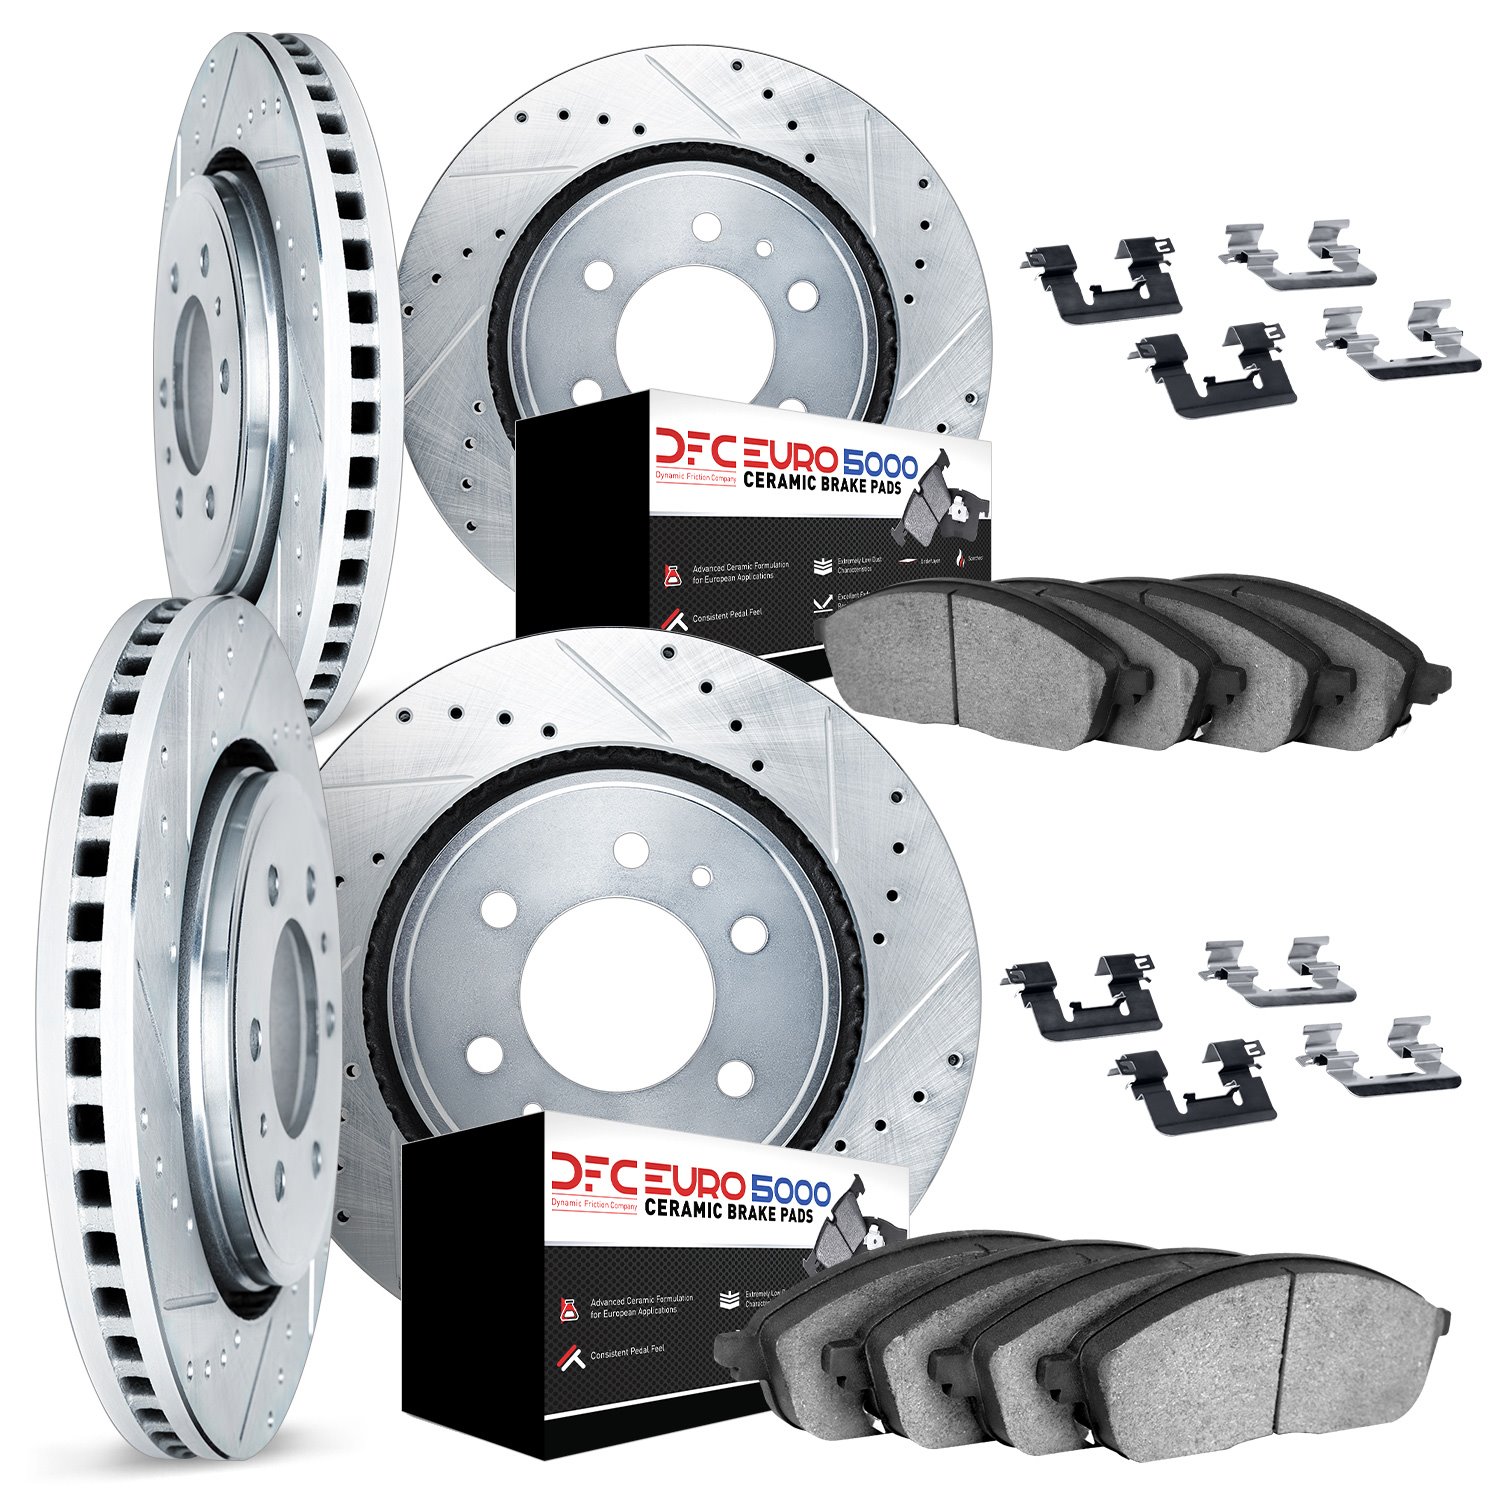 7614-46003 Drilled/Slotted Brake Rotors w/5000 Euro Ceramic Brake Pads Kit & Hardware [Silver], 2004-2009 GM, Position: Front an